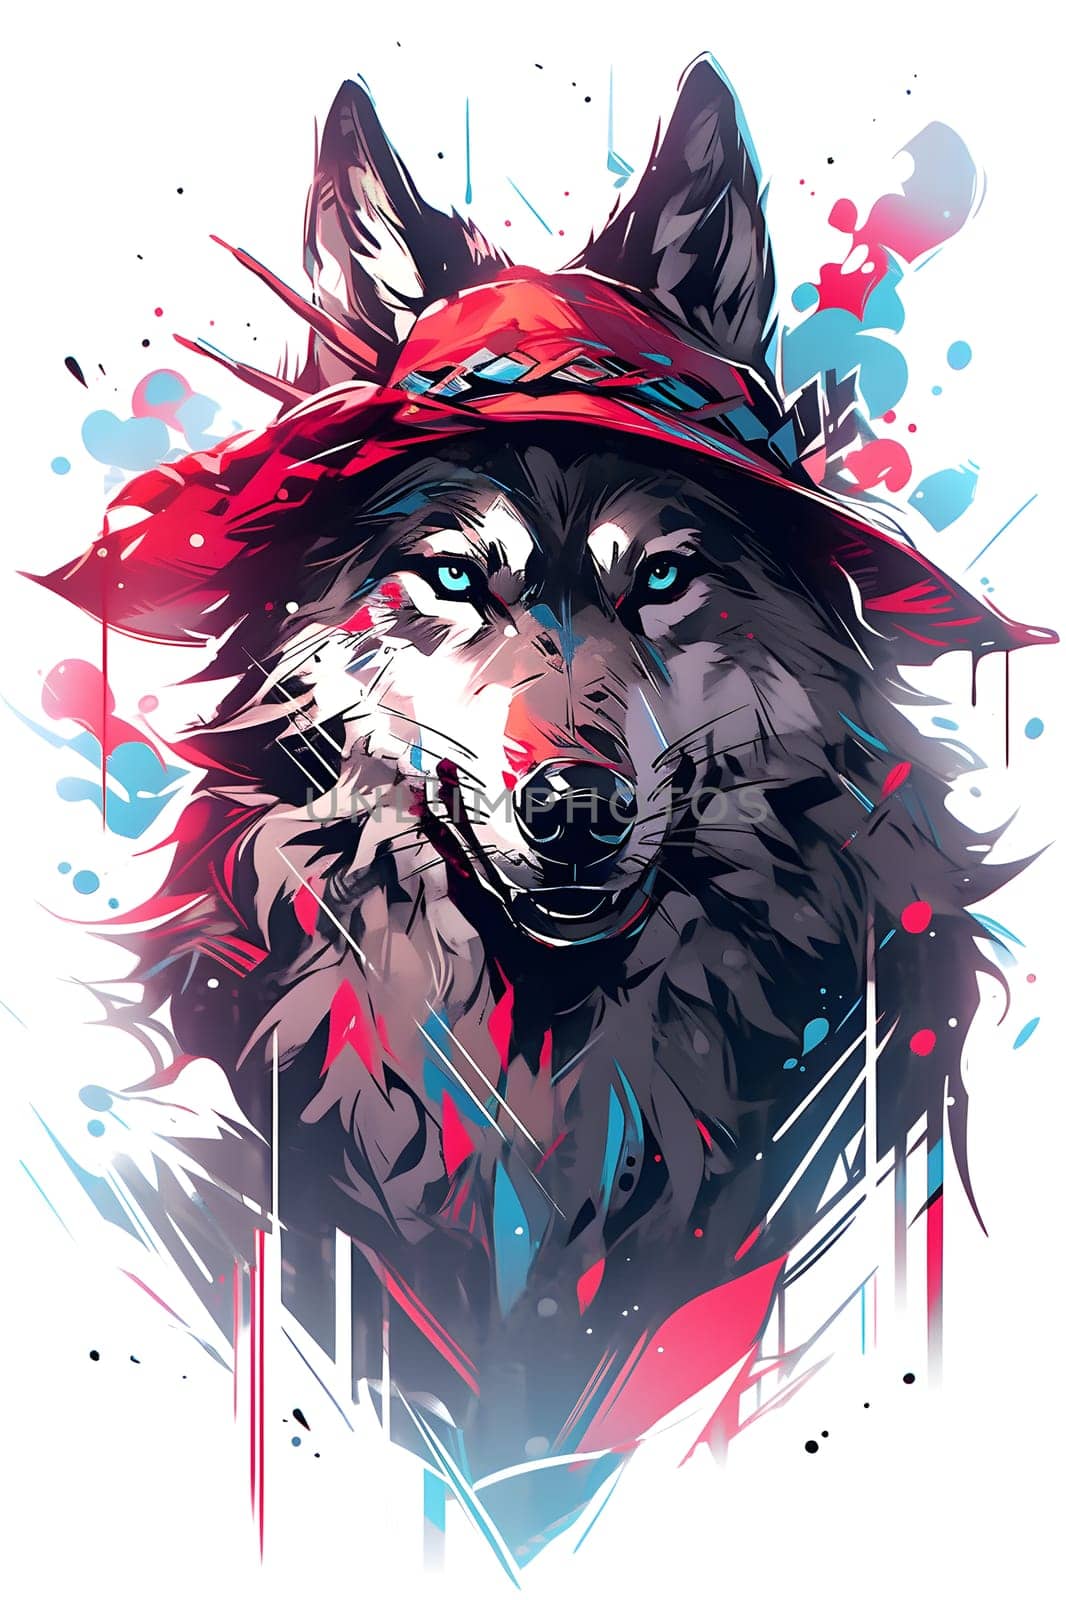 Vibrant painting of a wolf in a red hat, a striking art piece in magenta hues by Nadtochiy